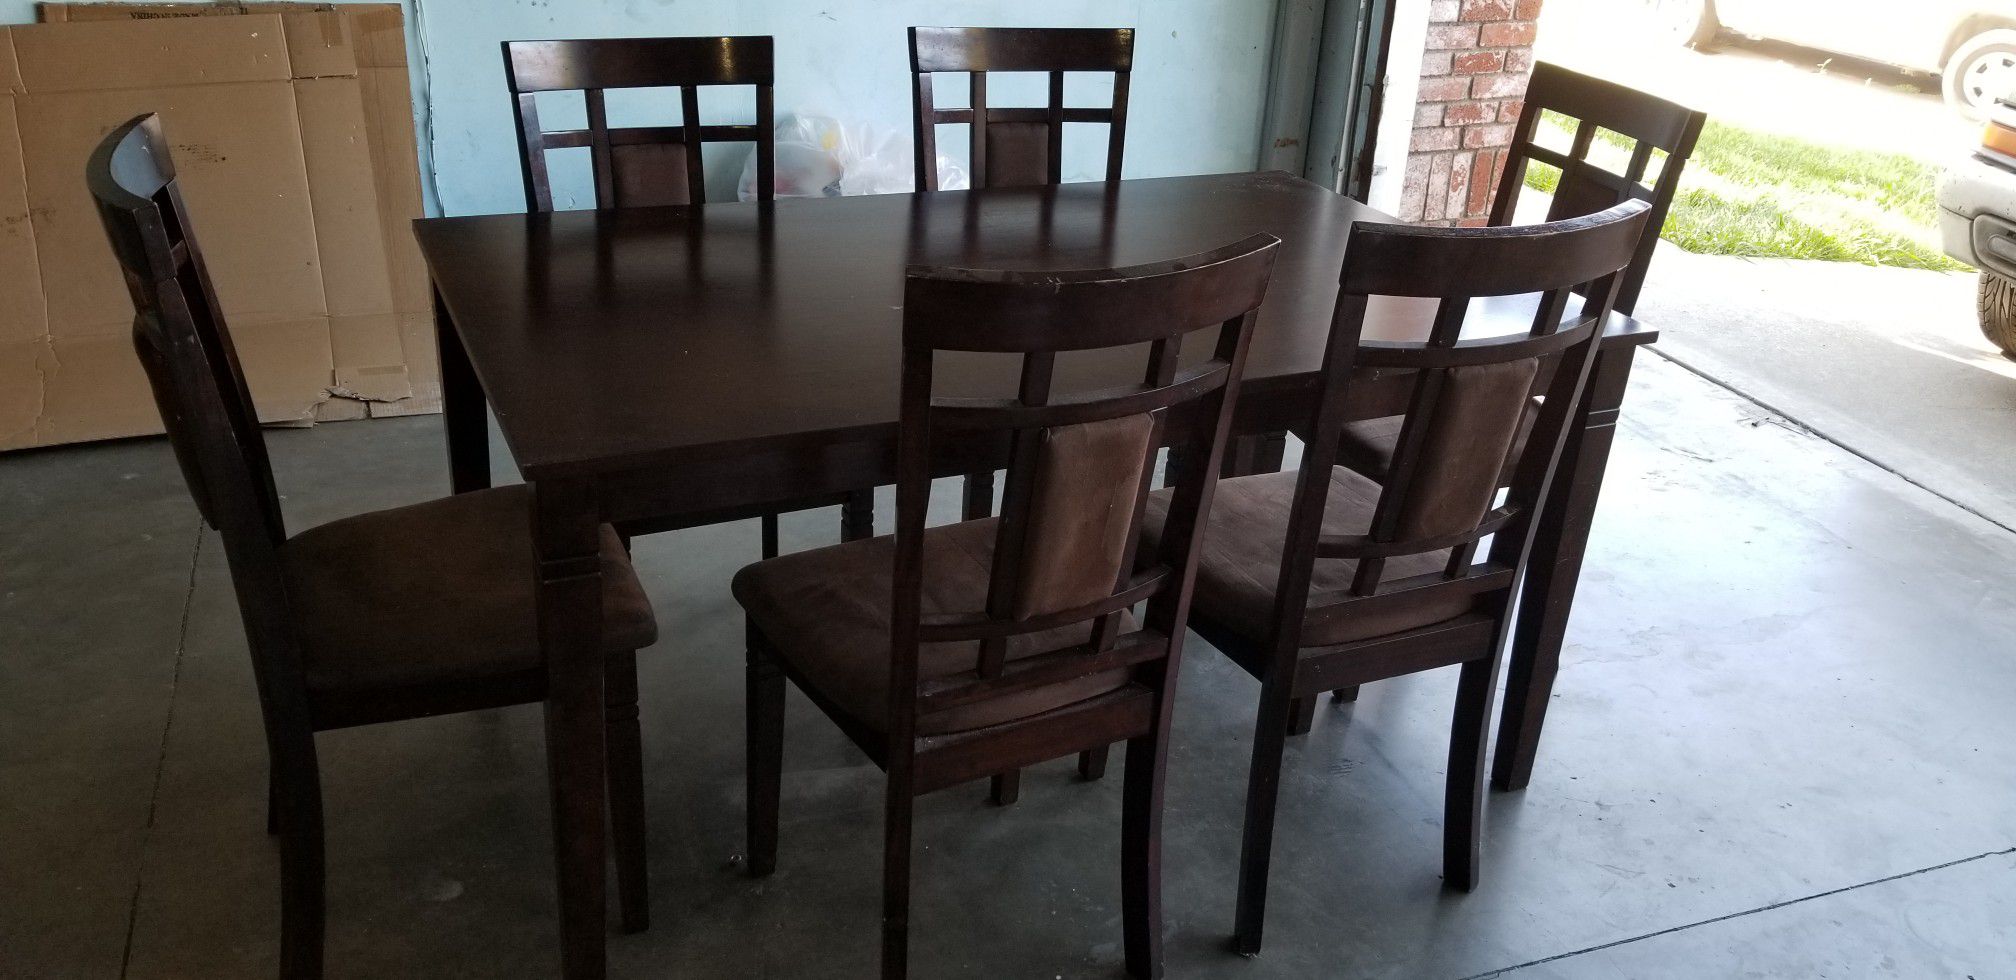 6 chairs dining table 59 × 35, 1/2 "